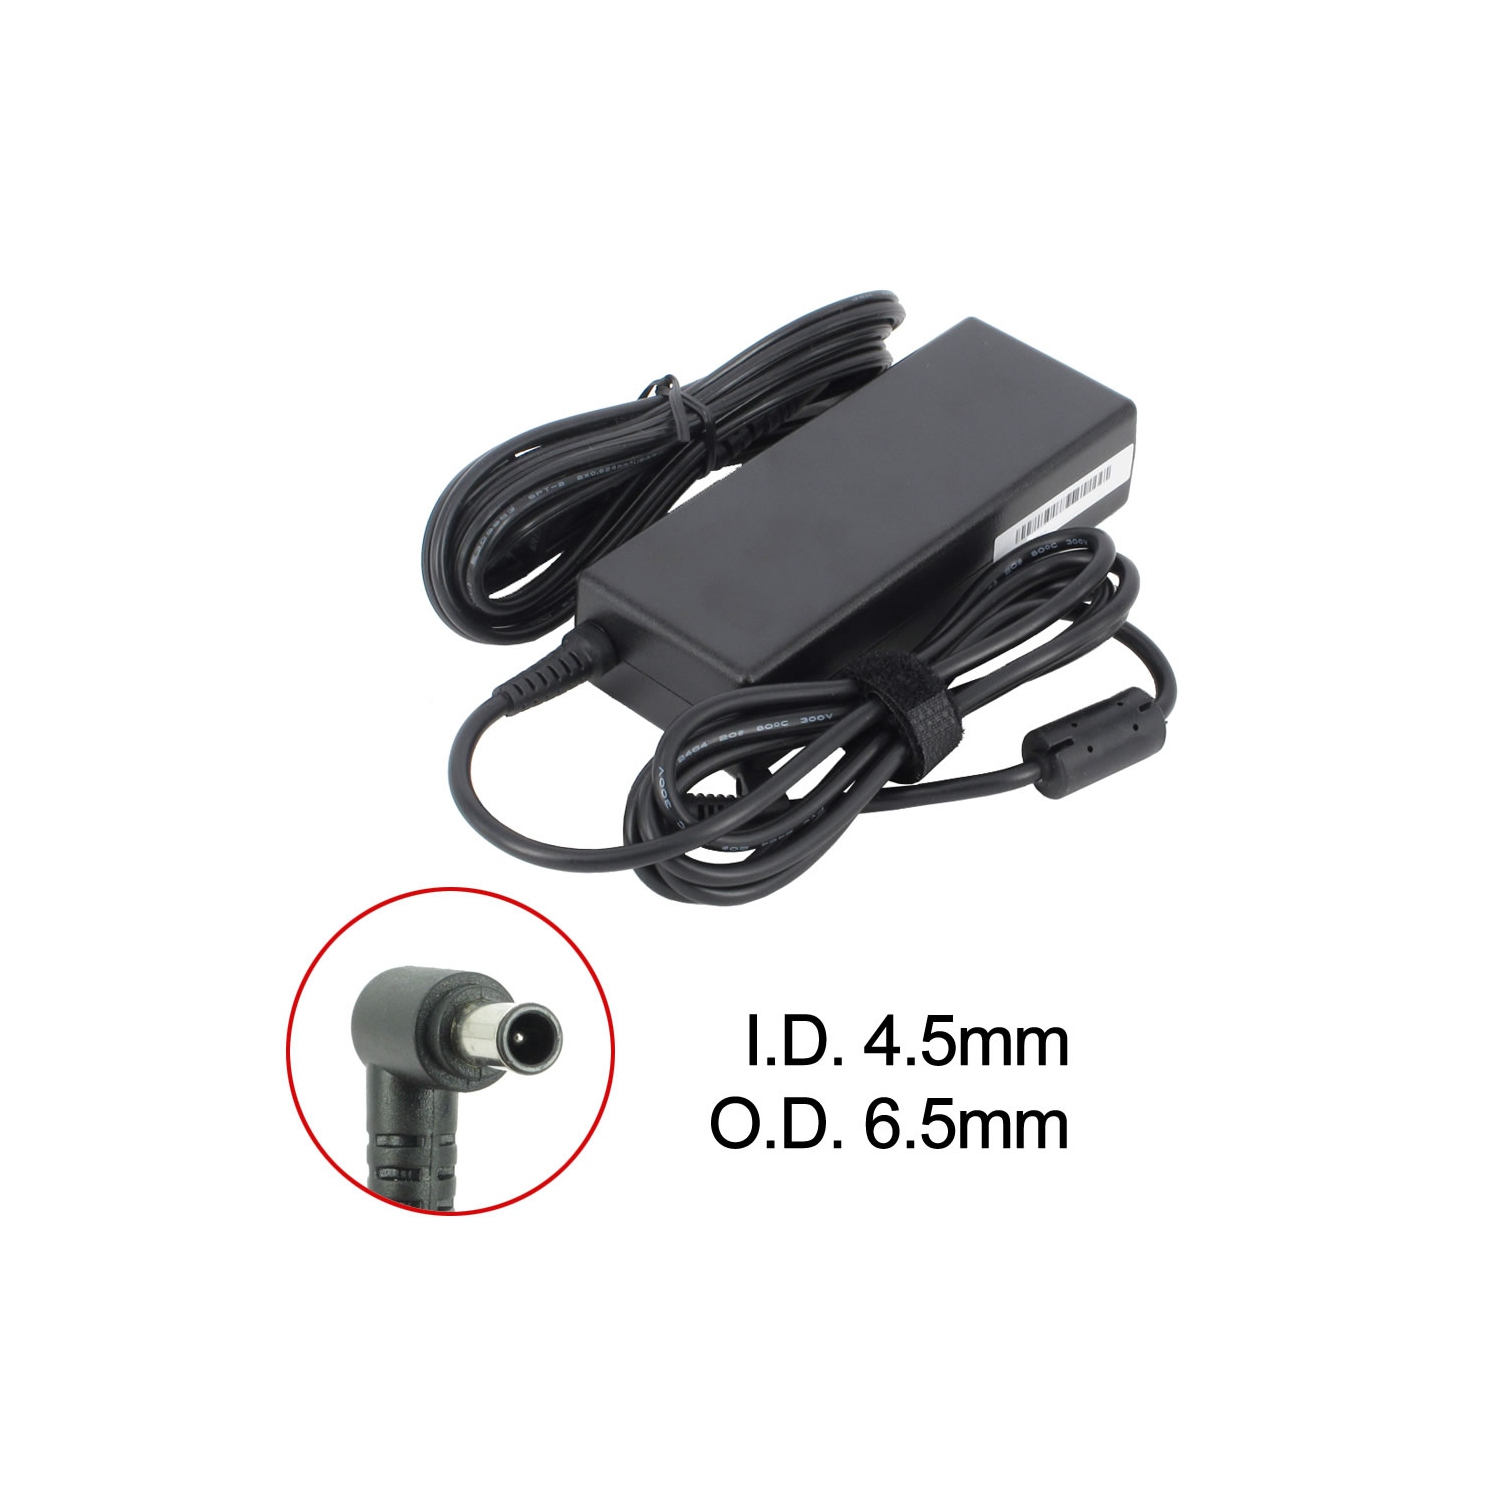 Brand New Laptop AC Adapter for Sony VAIO VGN-C1S/W, PCGA-AC19V10, PCGA-AC19V3, VGP-AC19V20, VGP-AC19V30, VGP-AC19V51